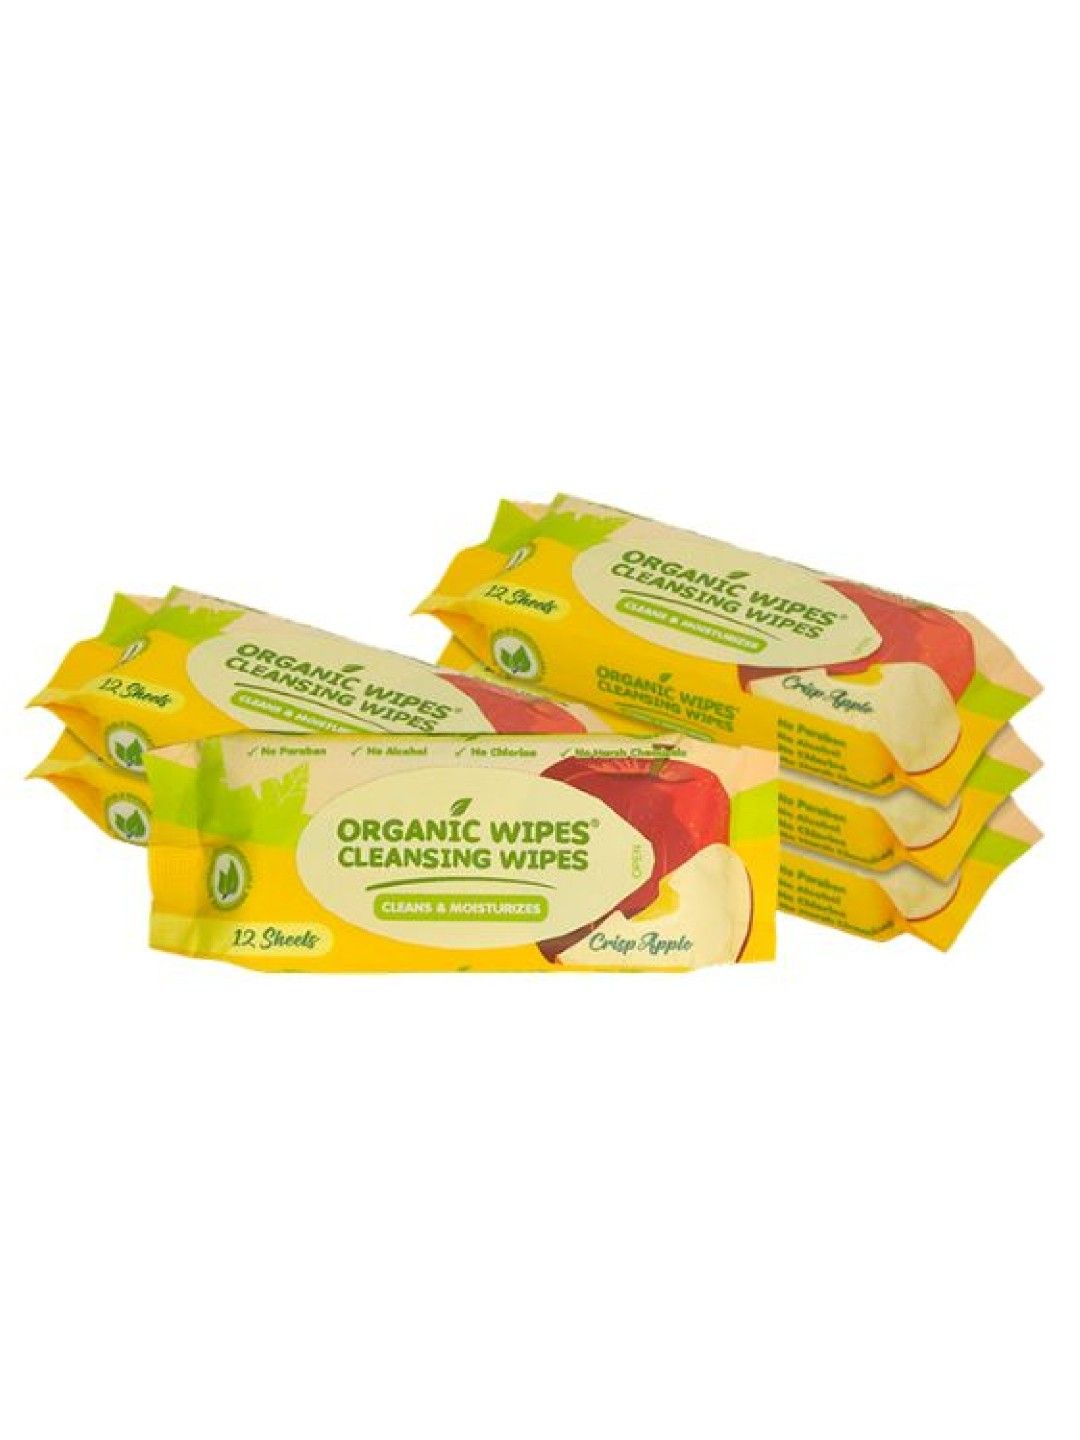 Organic Baby Wipes Organic Wipes Cleansing Wipes Crisp Apple (12s x 6-pack)